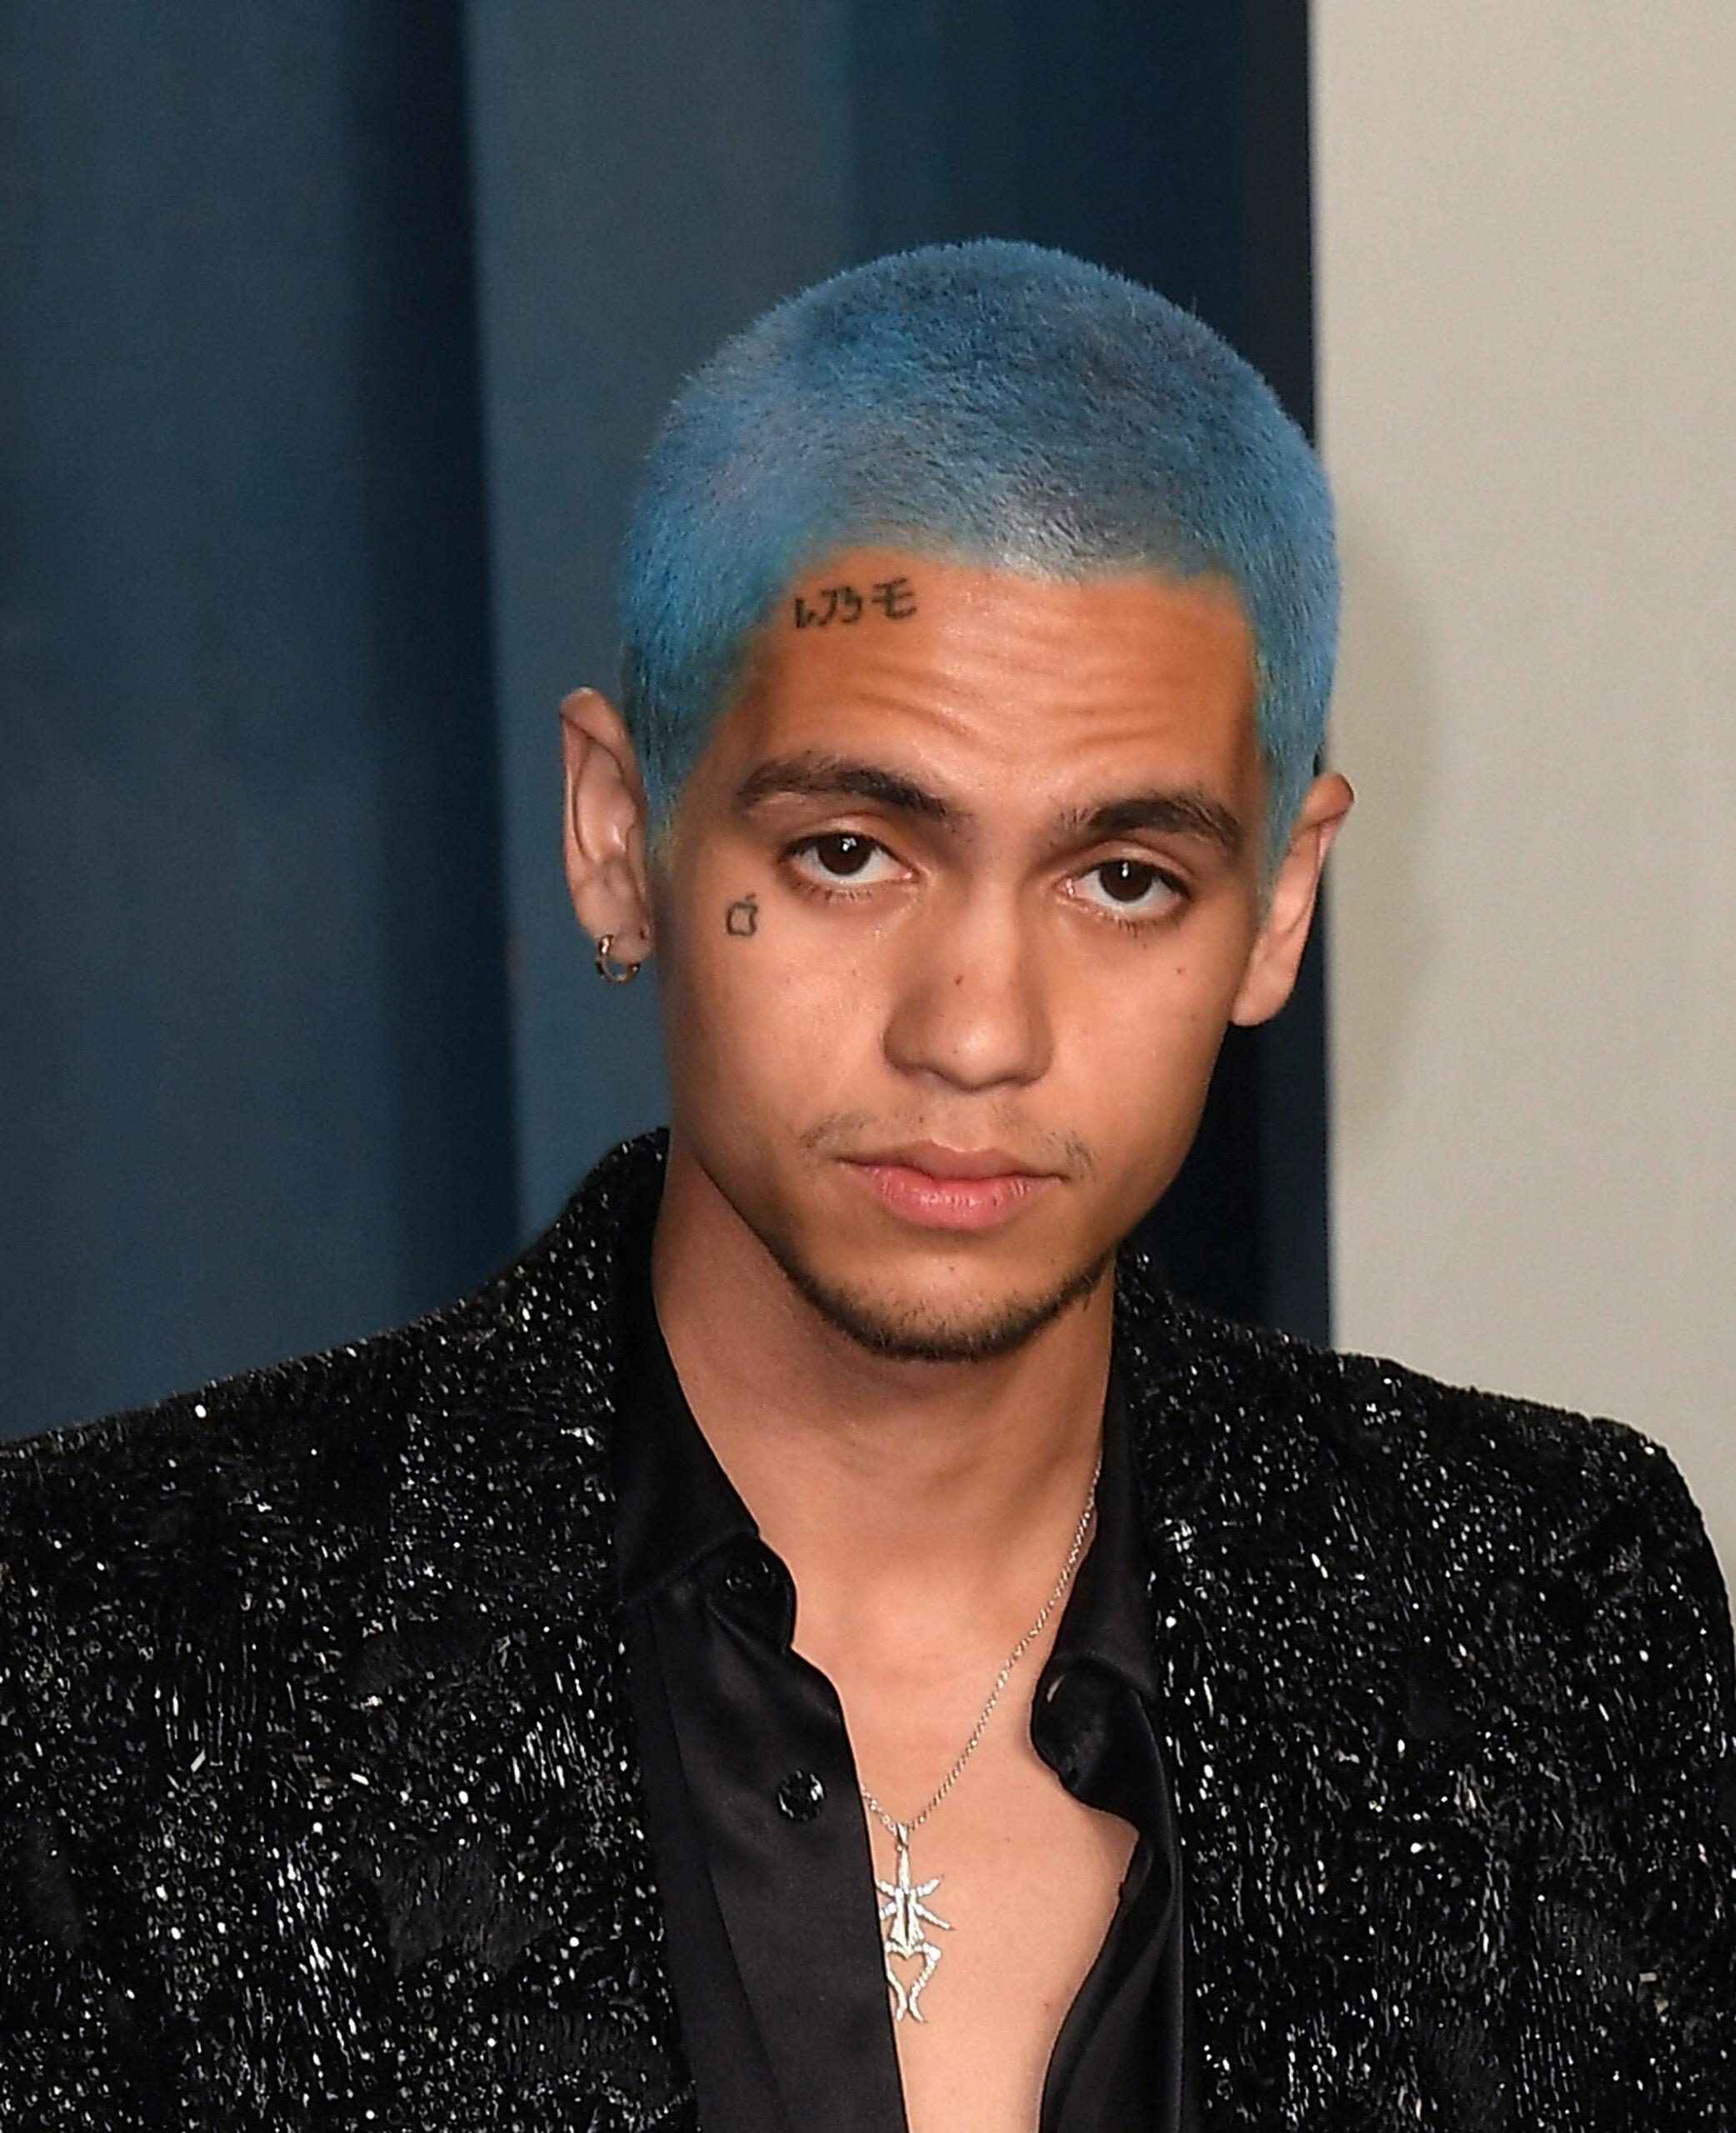 Man with blue hair on red carpet